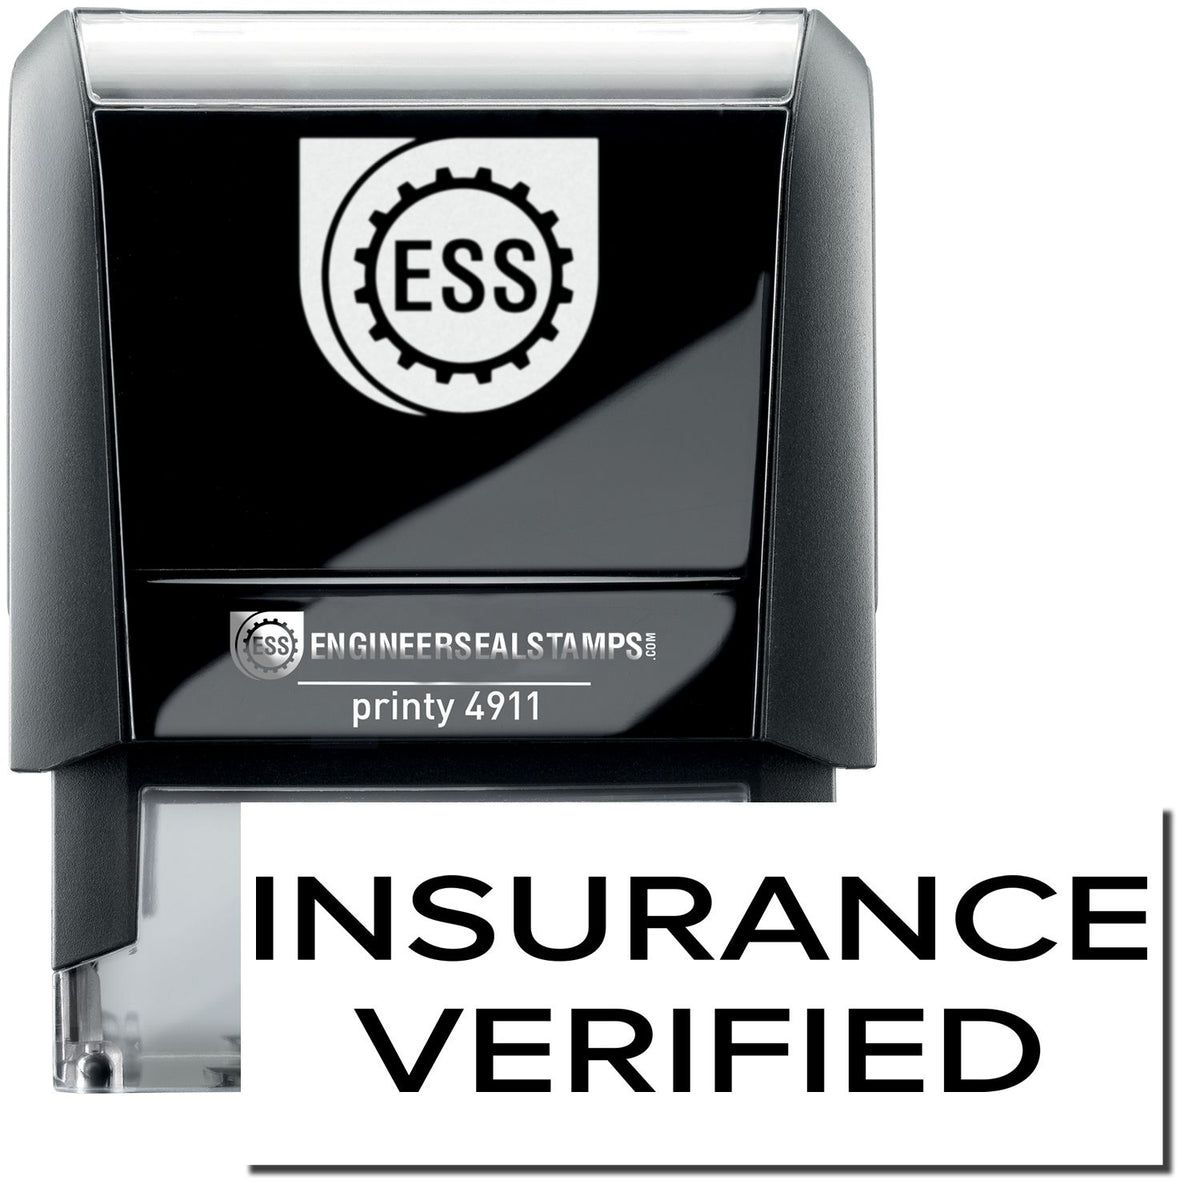 A self-inking stamp with a stamped image showing how the text &quot;INSURANCE VERIFIED&quot; in a narrow font is displayed after stamping.